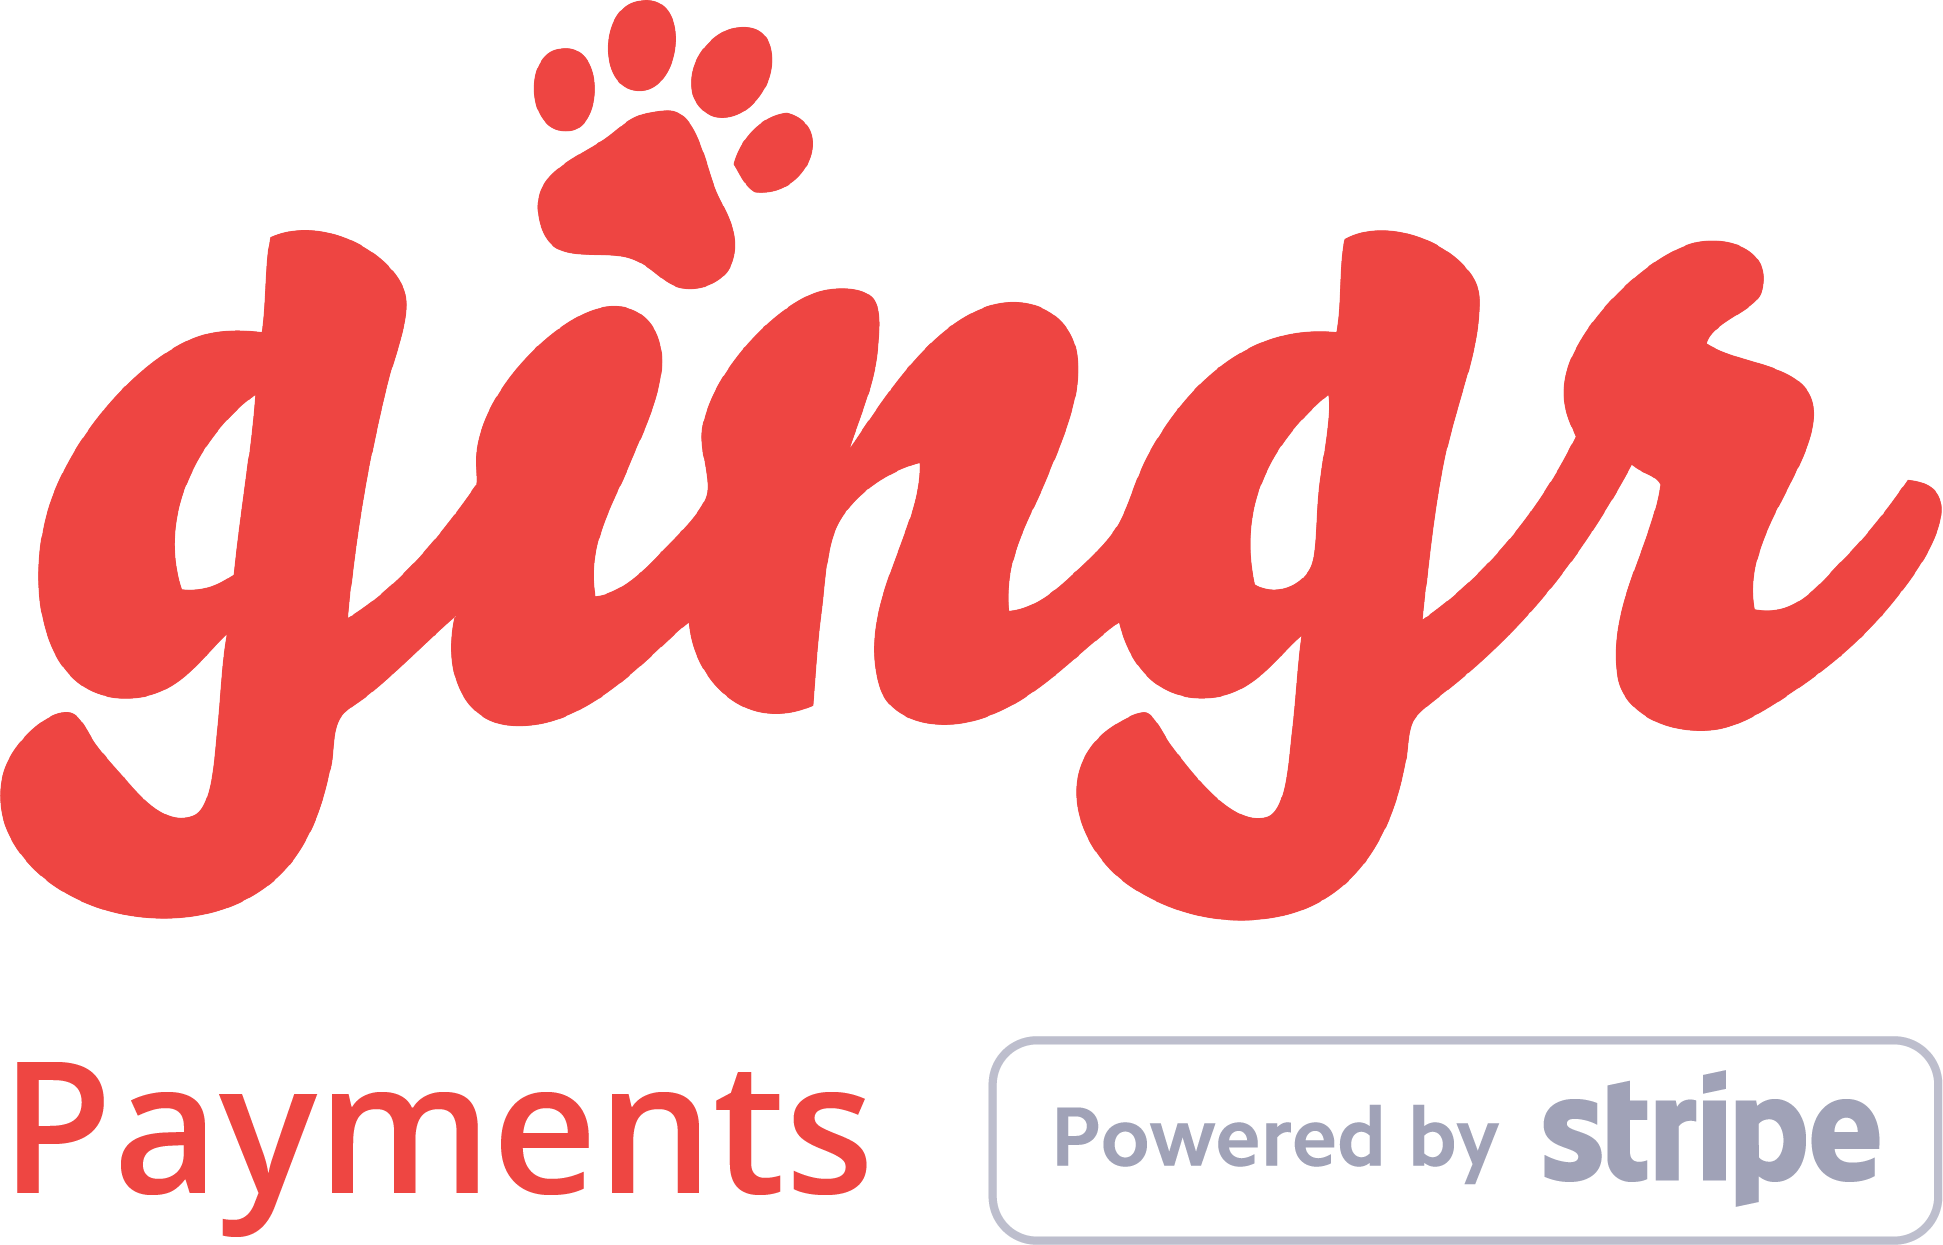 Gingr Payments Powered by Stripe